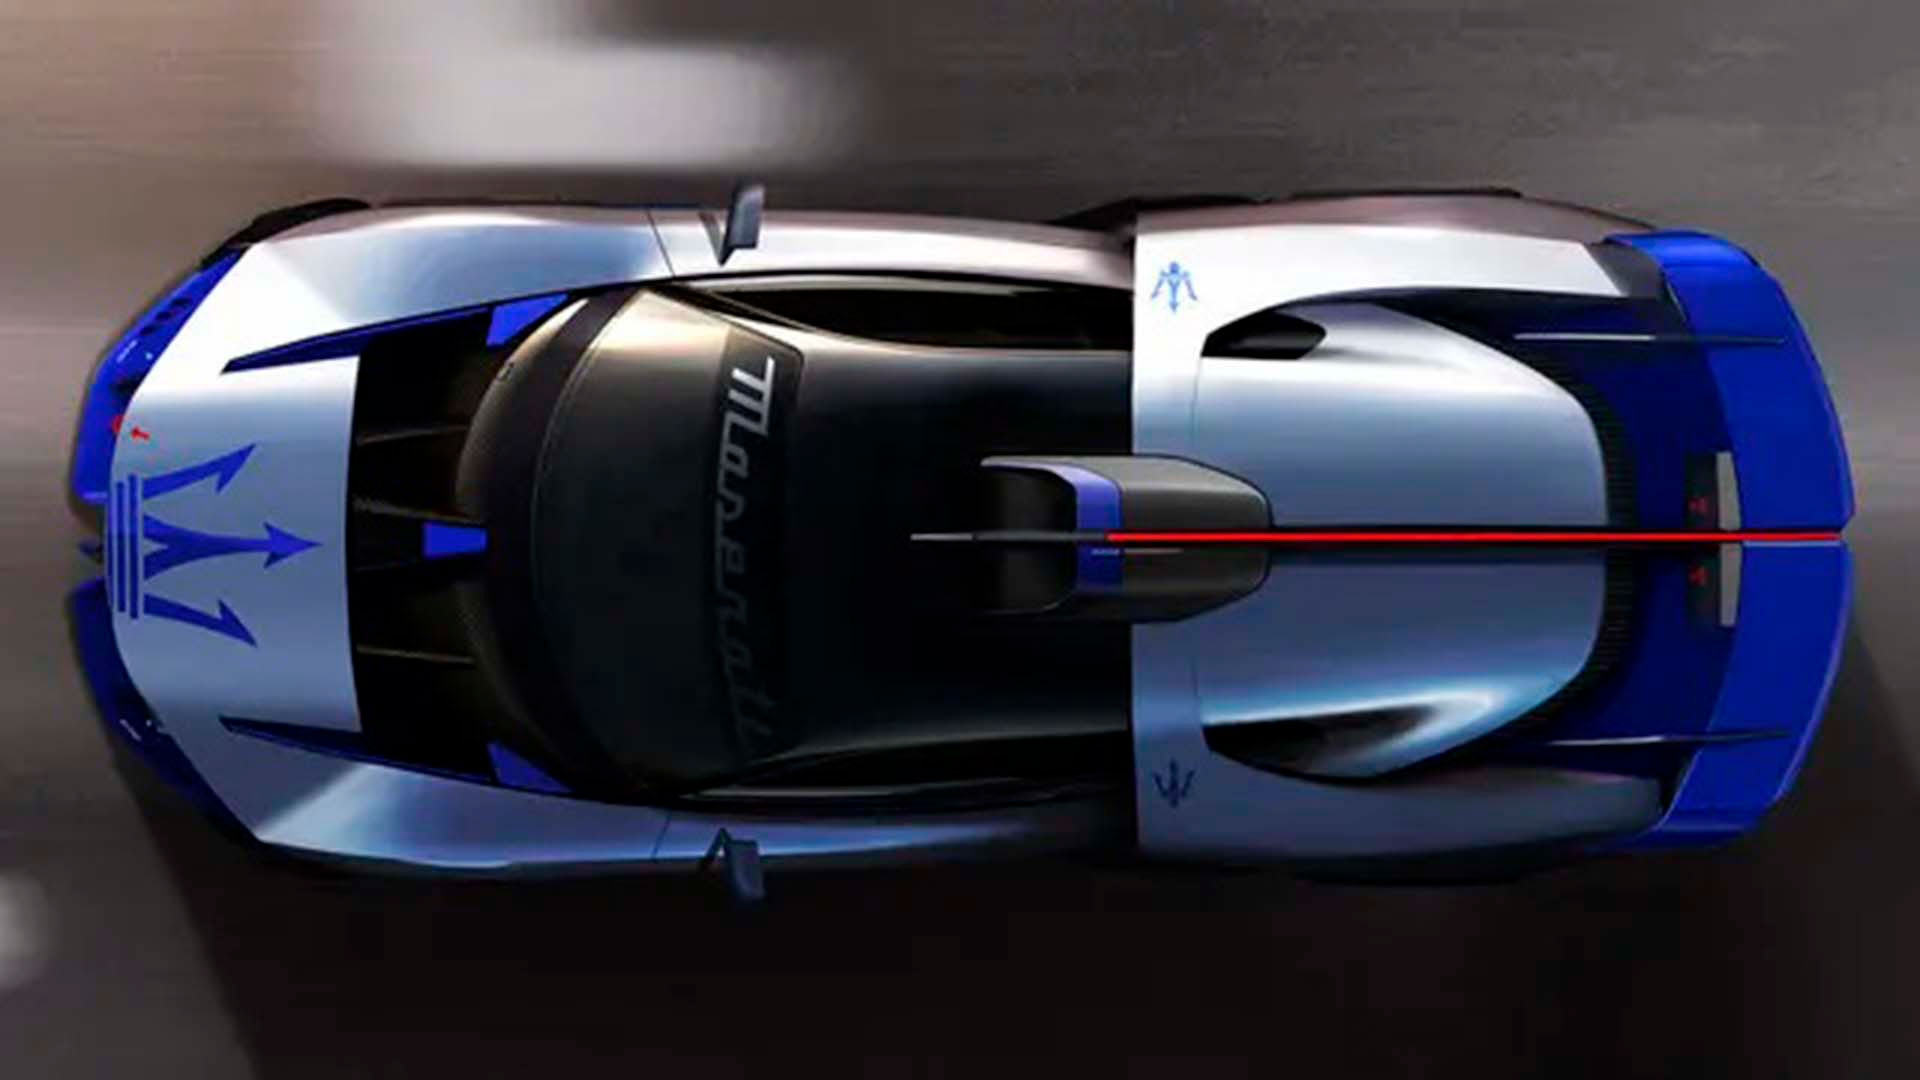 The top view of Project24 shows completely different aerodynamic handling than a normal car